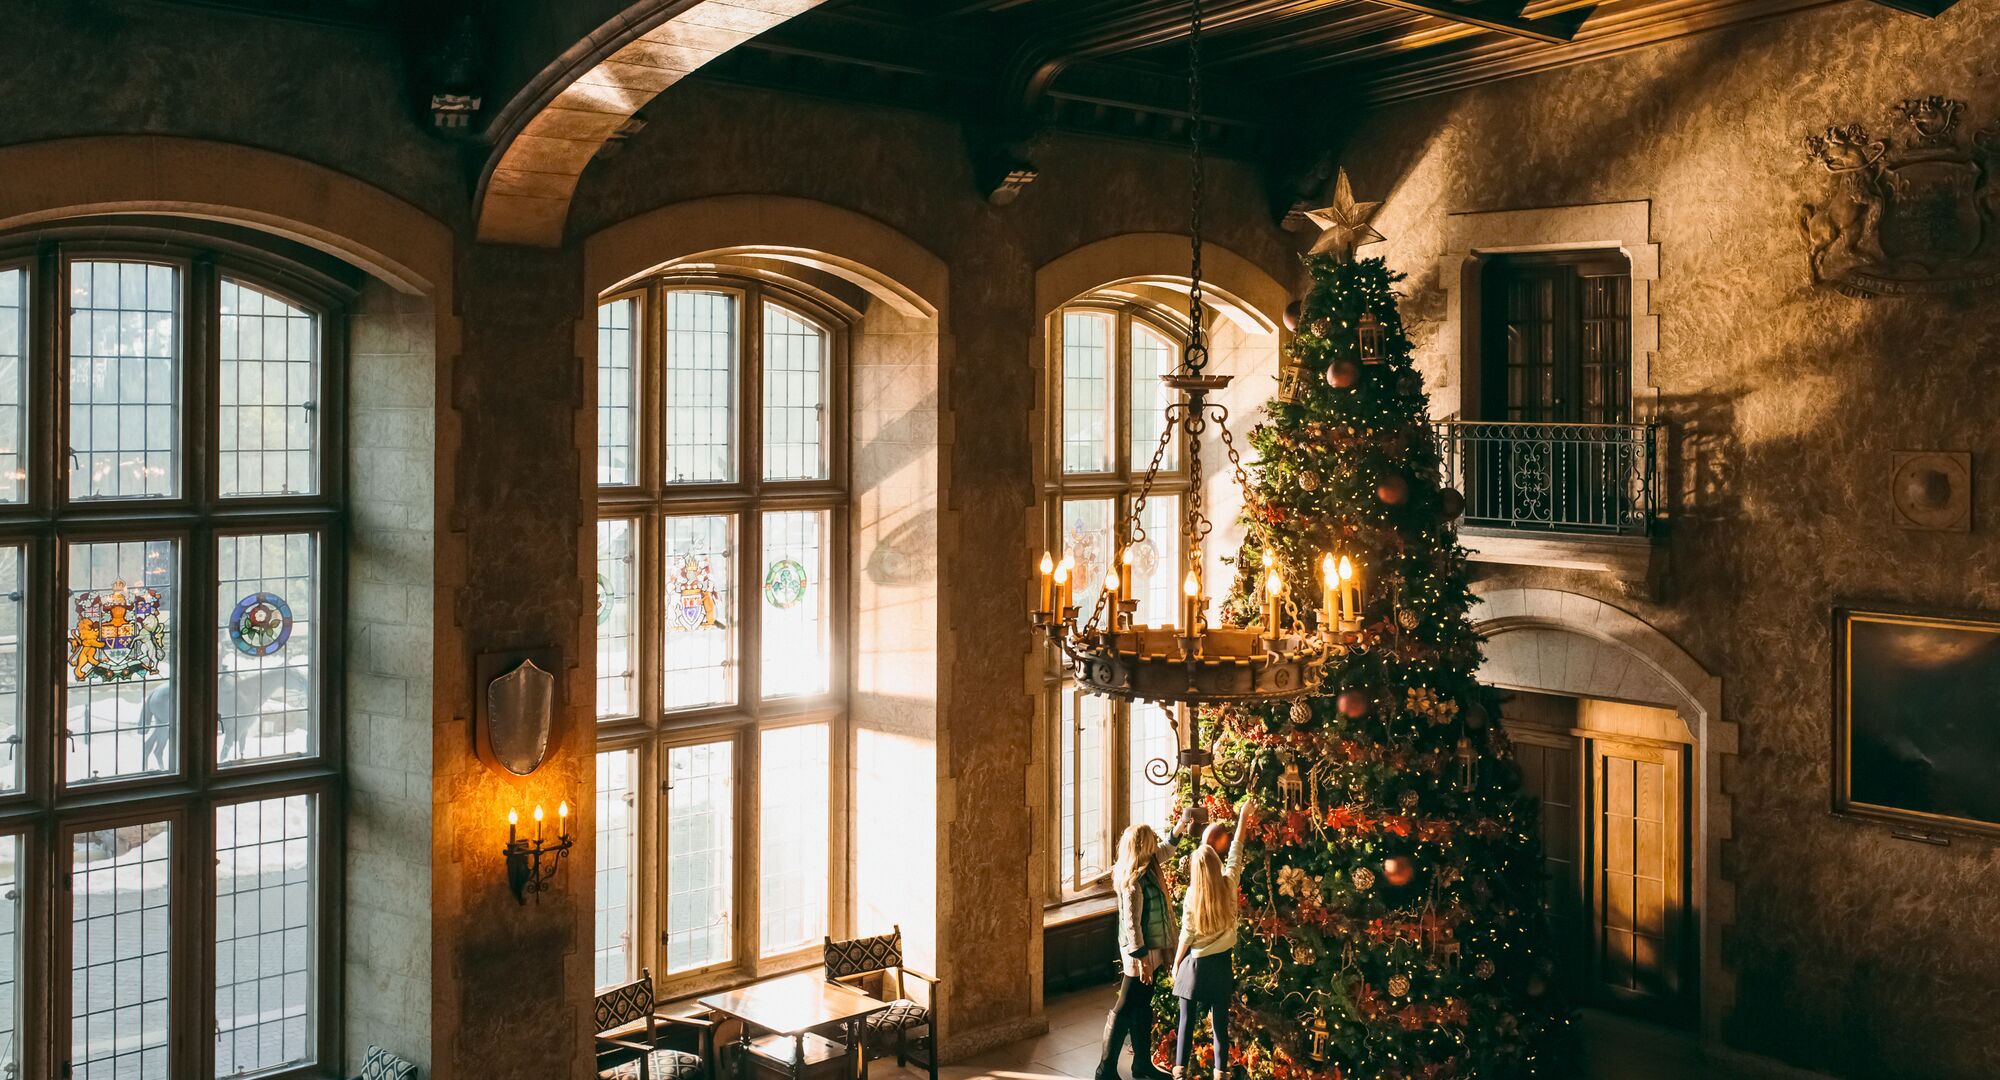 Two women look at a massive Christmas tree inside a grand hall at the Banff Springs Hotel. There are three windows along the wall illuminating the tree in Banff National Park.